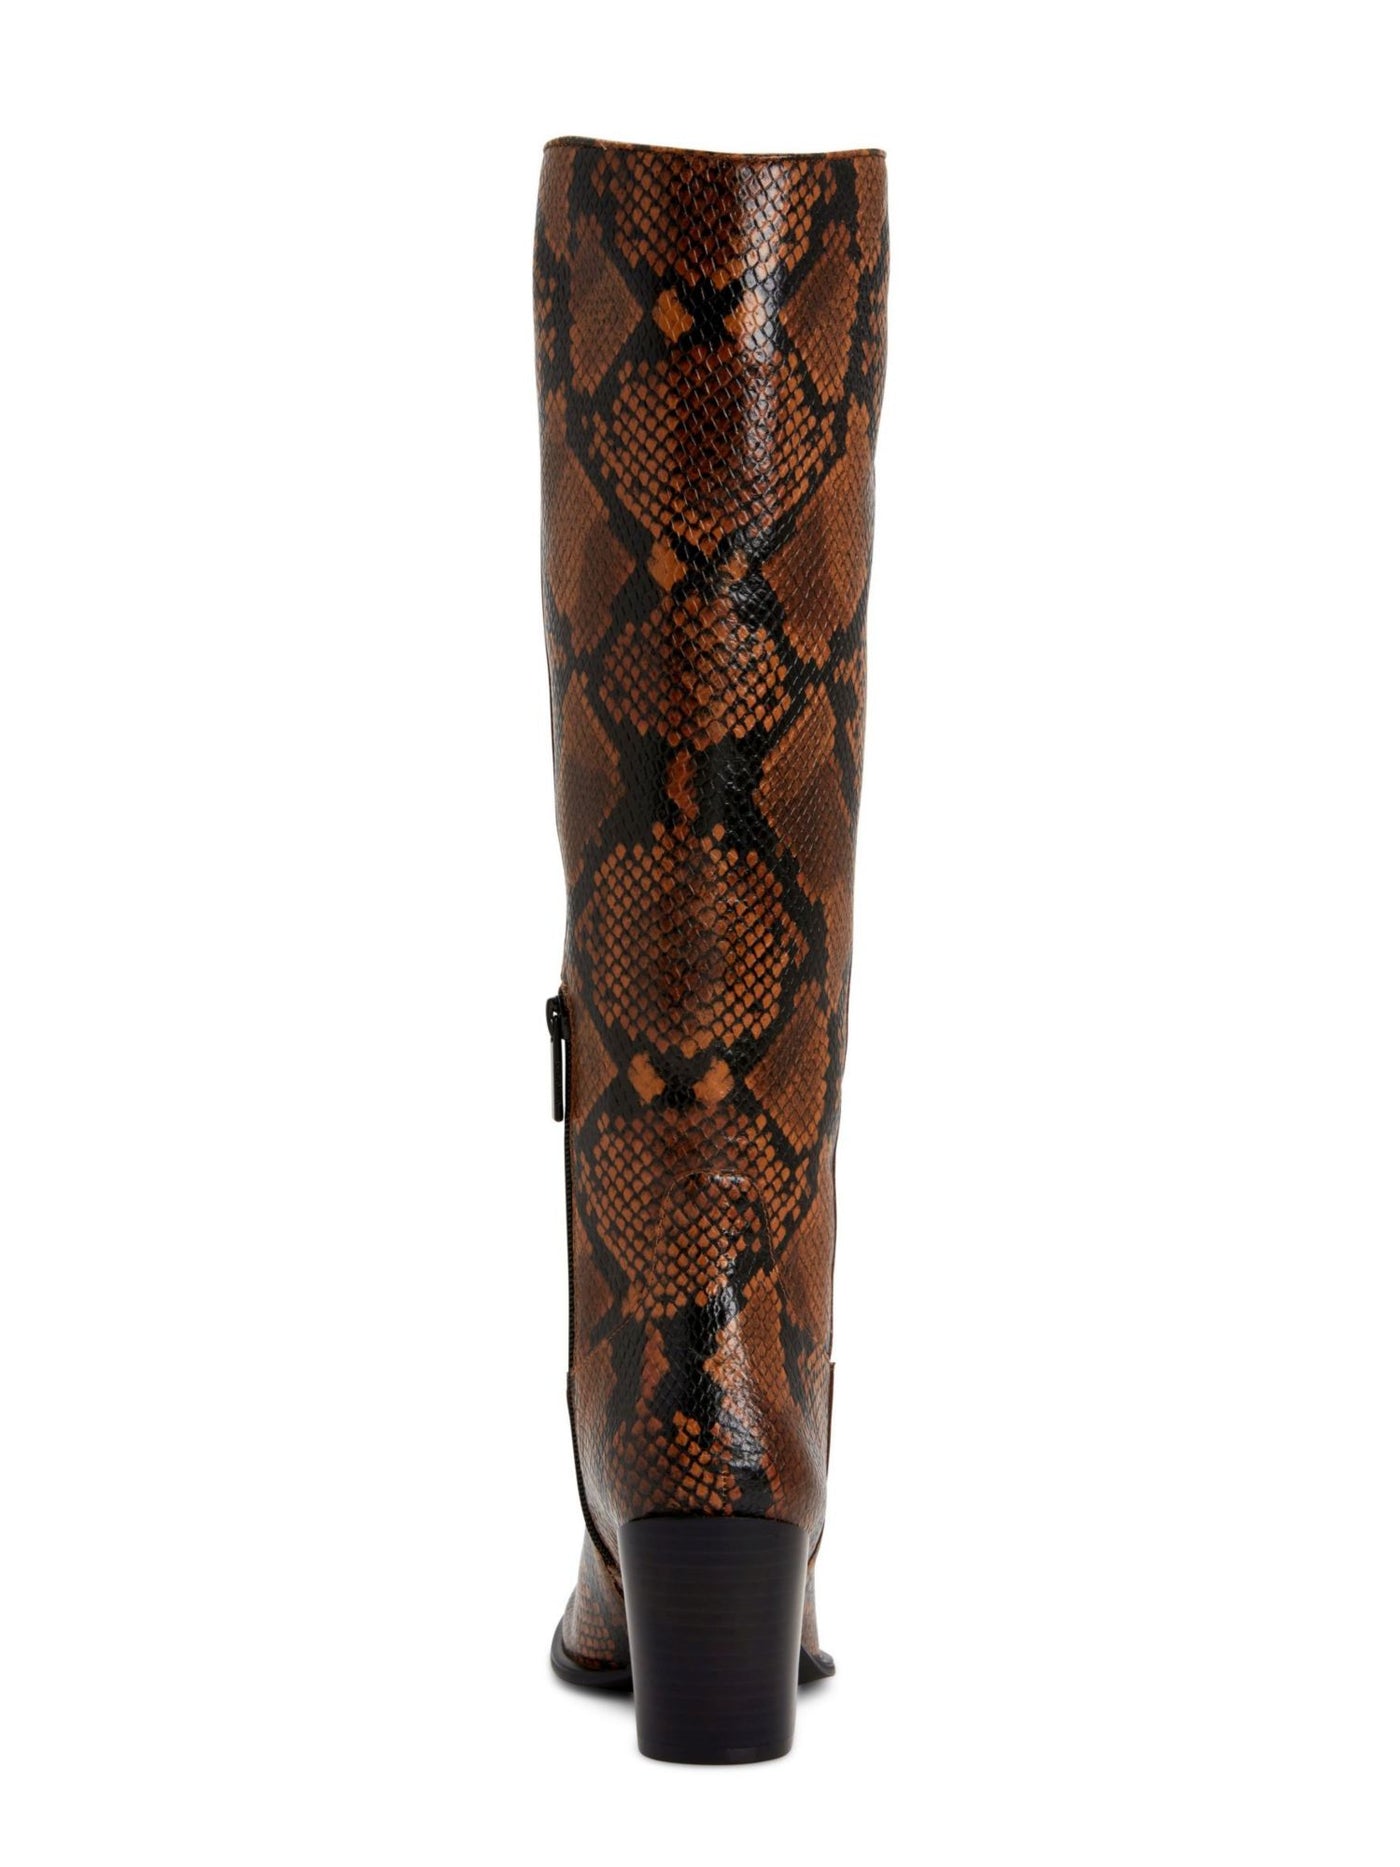 CALVIN KLEIN Womens Brown Animal Print Almond Toe Stacked Heel Zip-Up Leather Heeled Boots 6.5